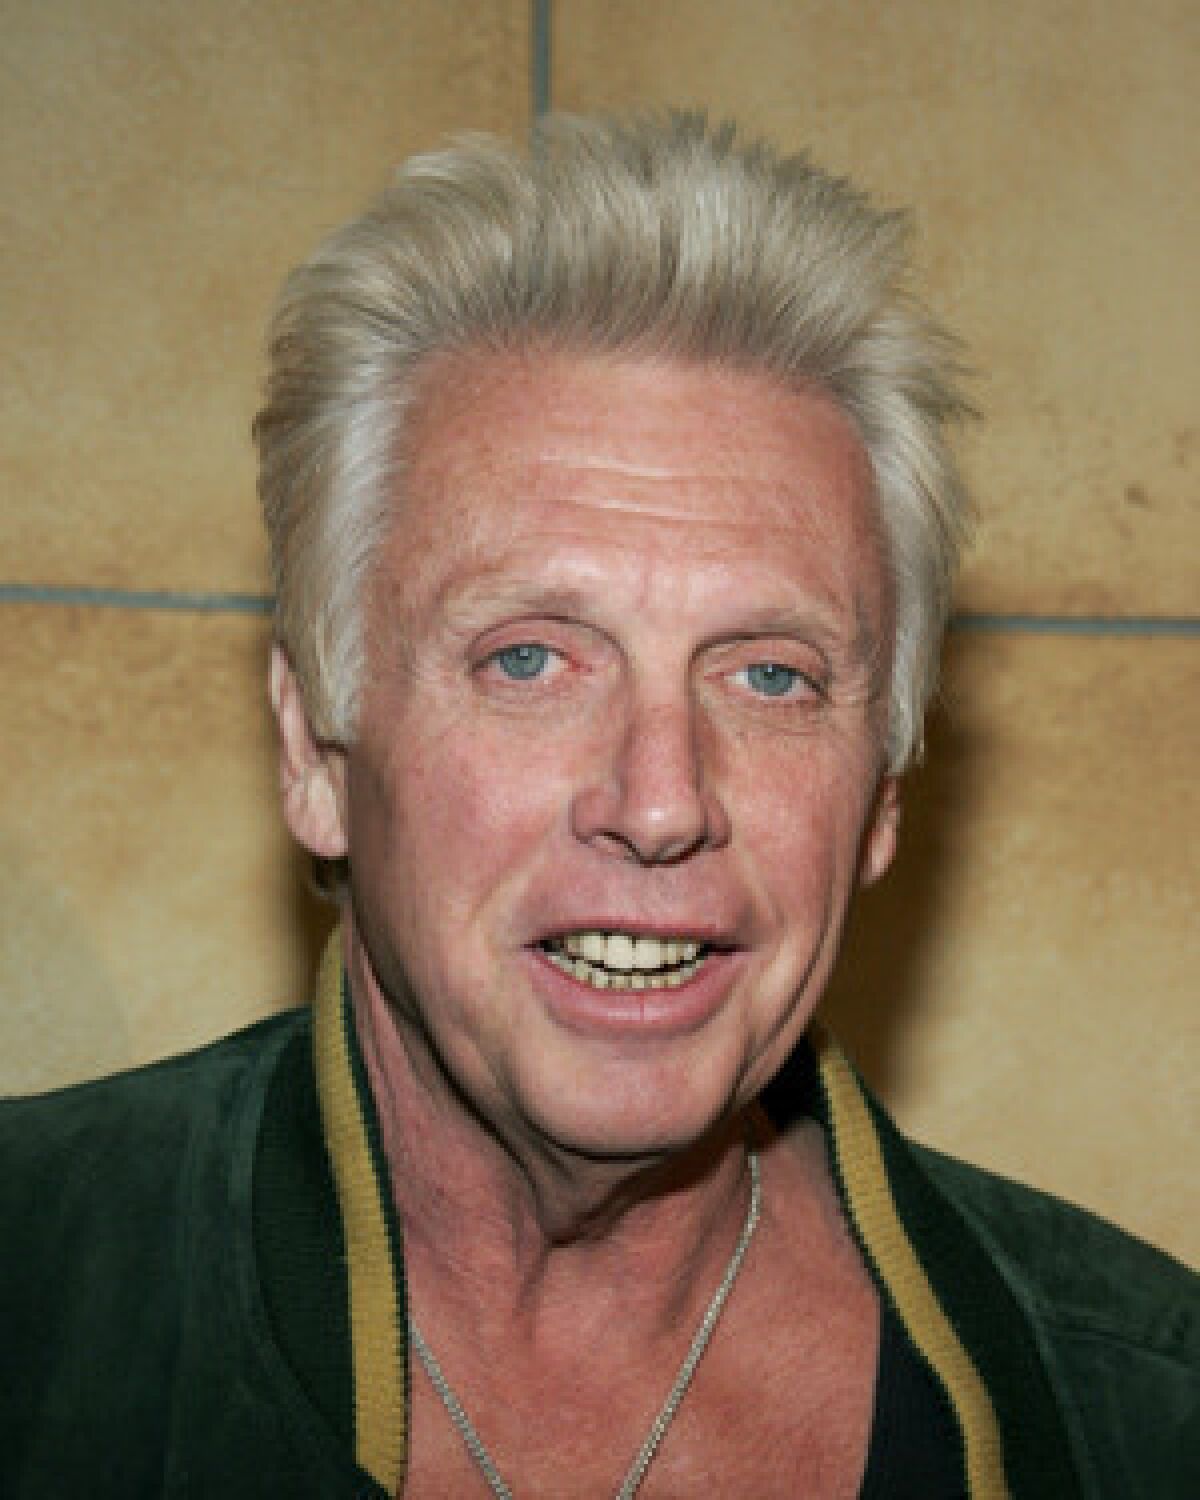 Jefferson Airplane drummer Joey Covington was killed in Palm Springs on Tuesday.